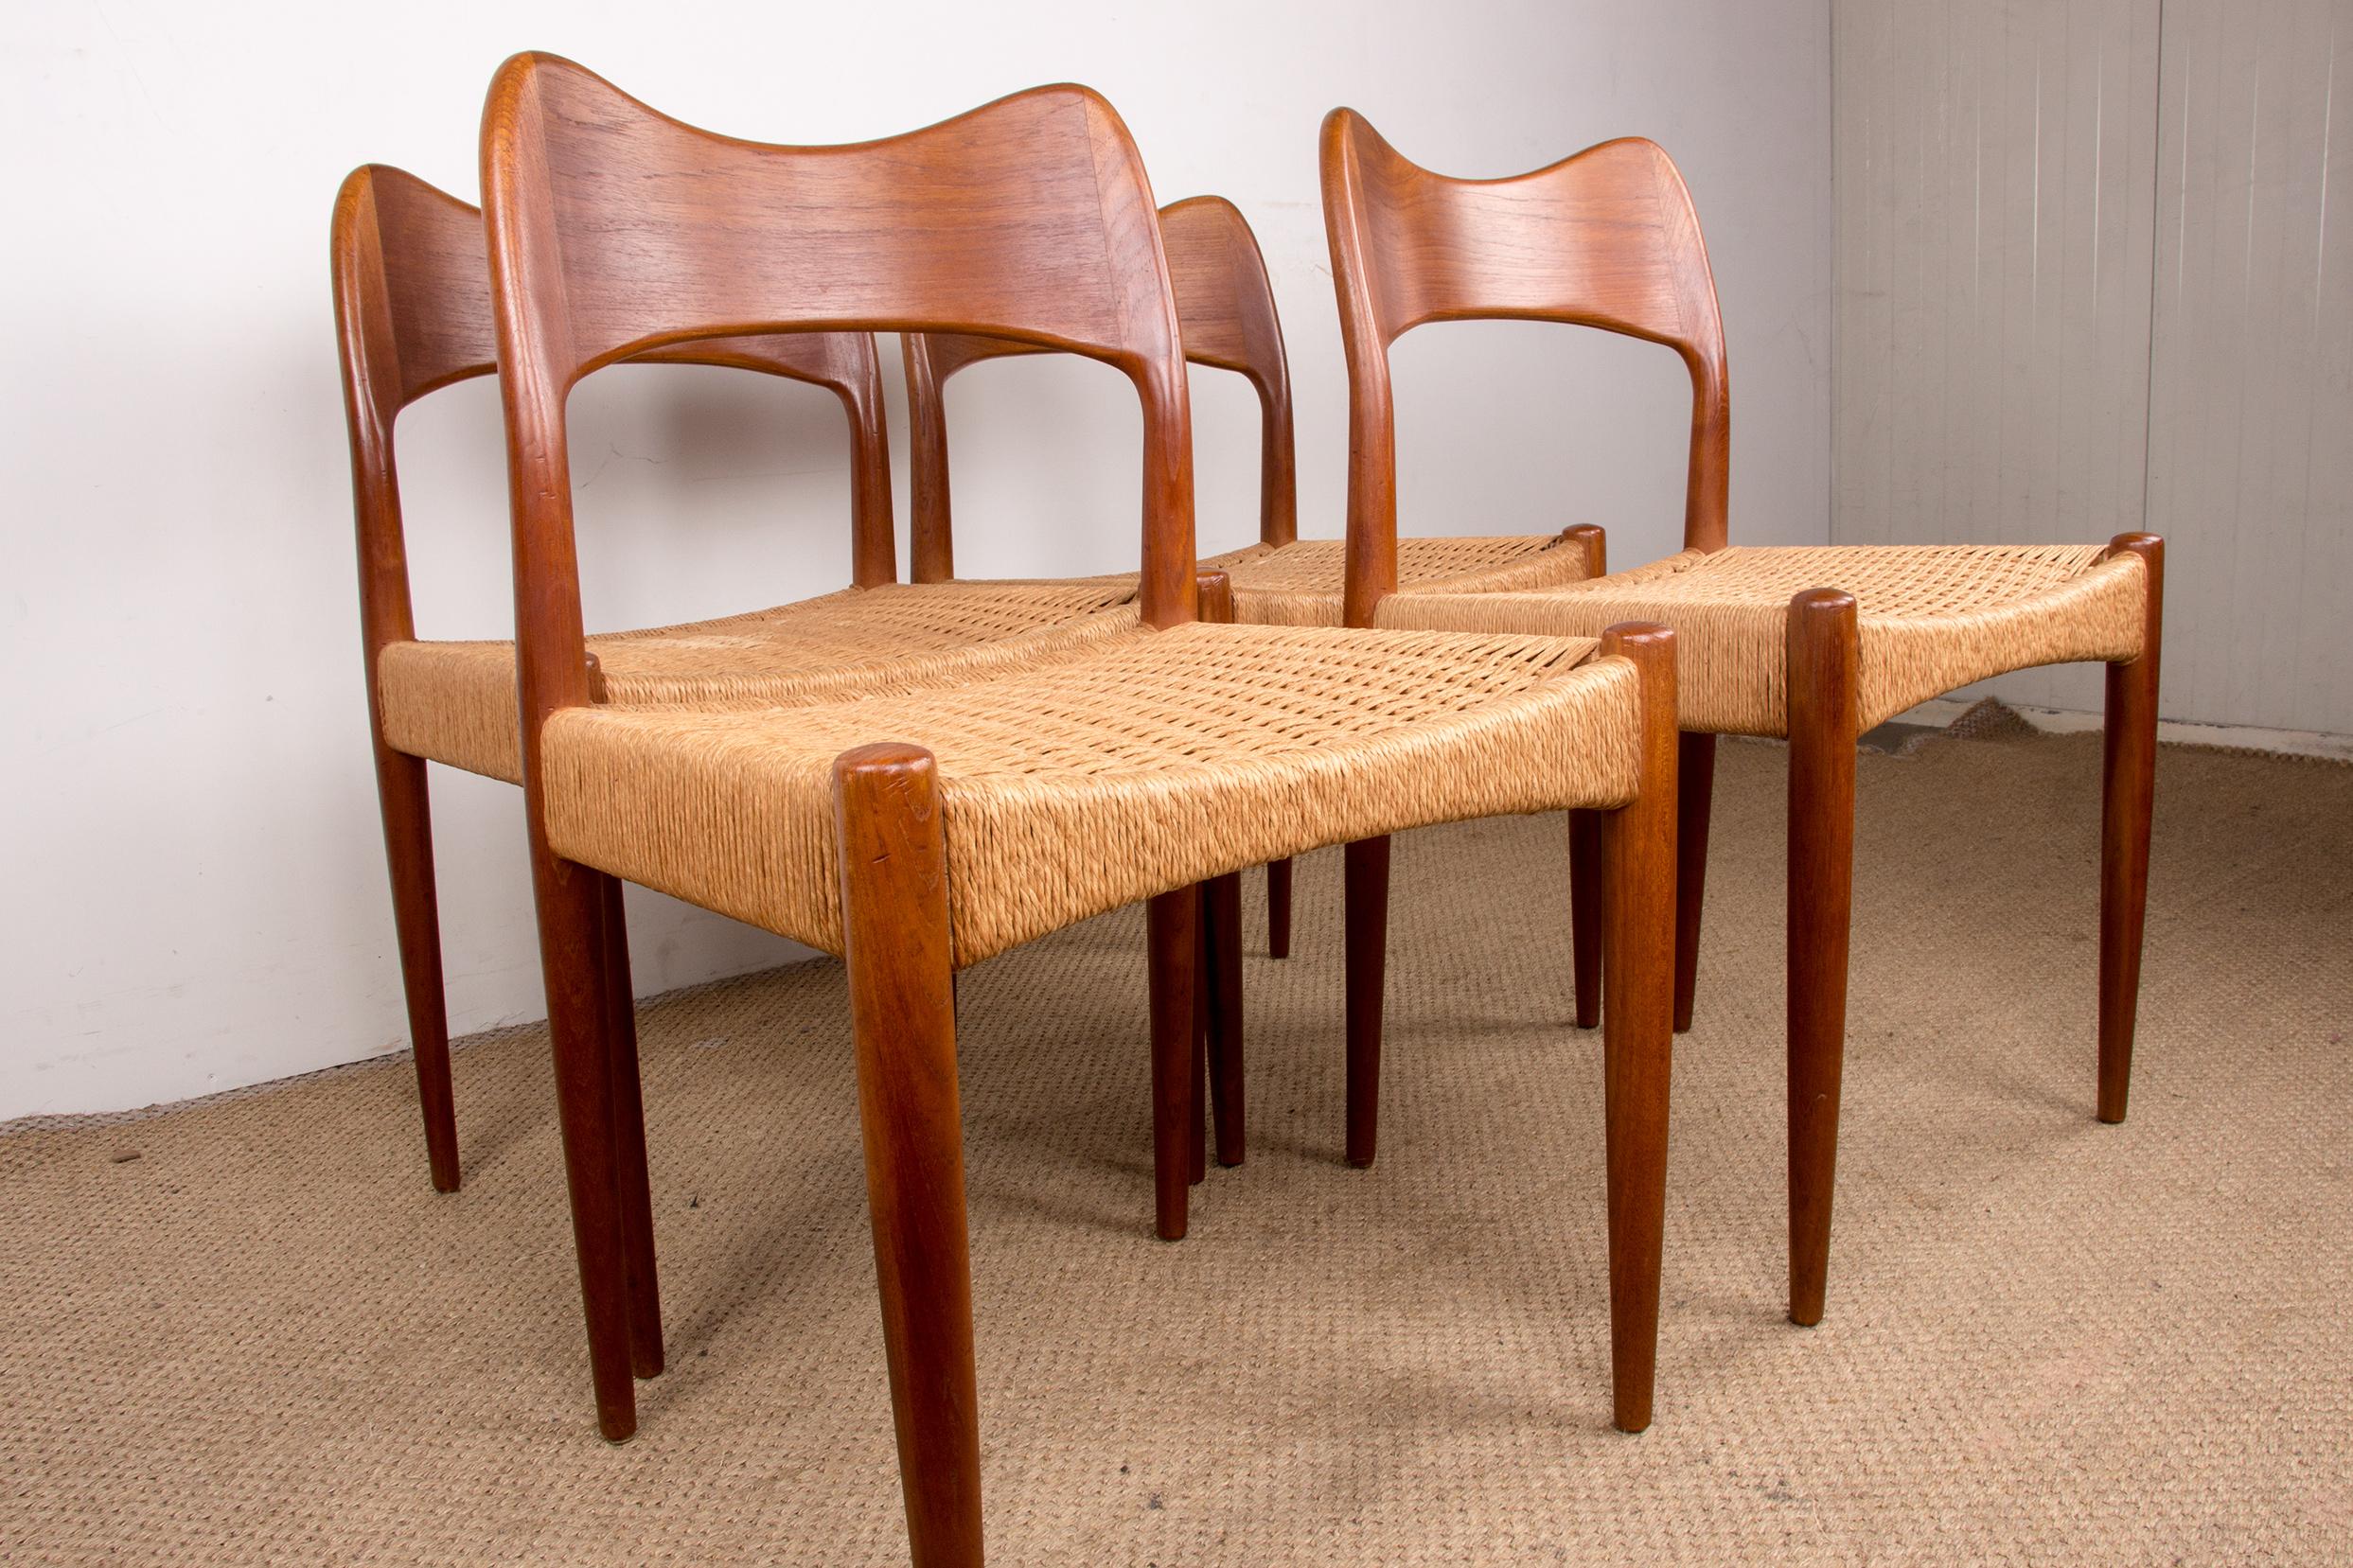 Series of 4 Danish Teak and Cordage chairs by Arne Hovmand Olsen 1960. For Sale 8